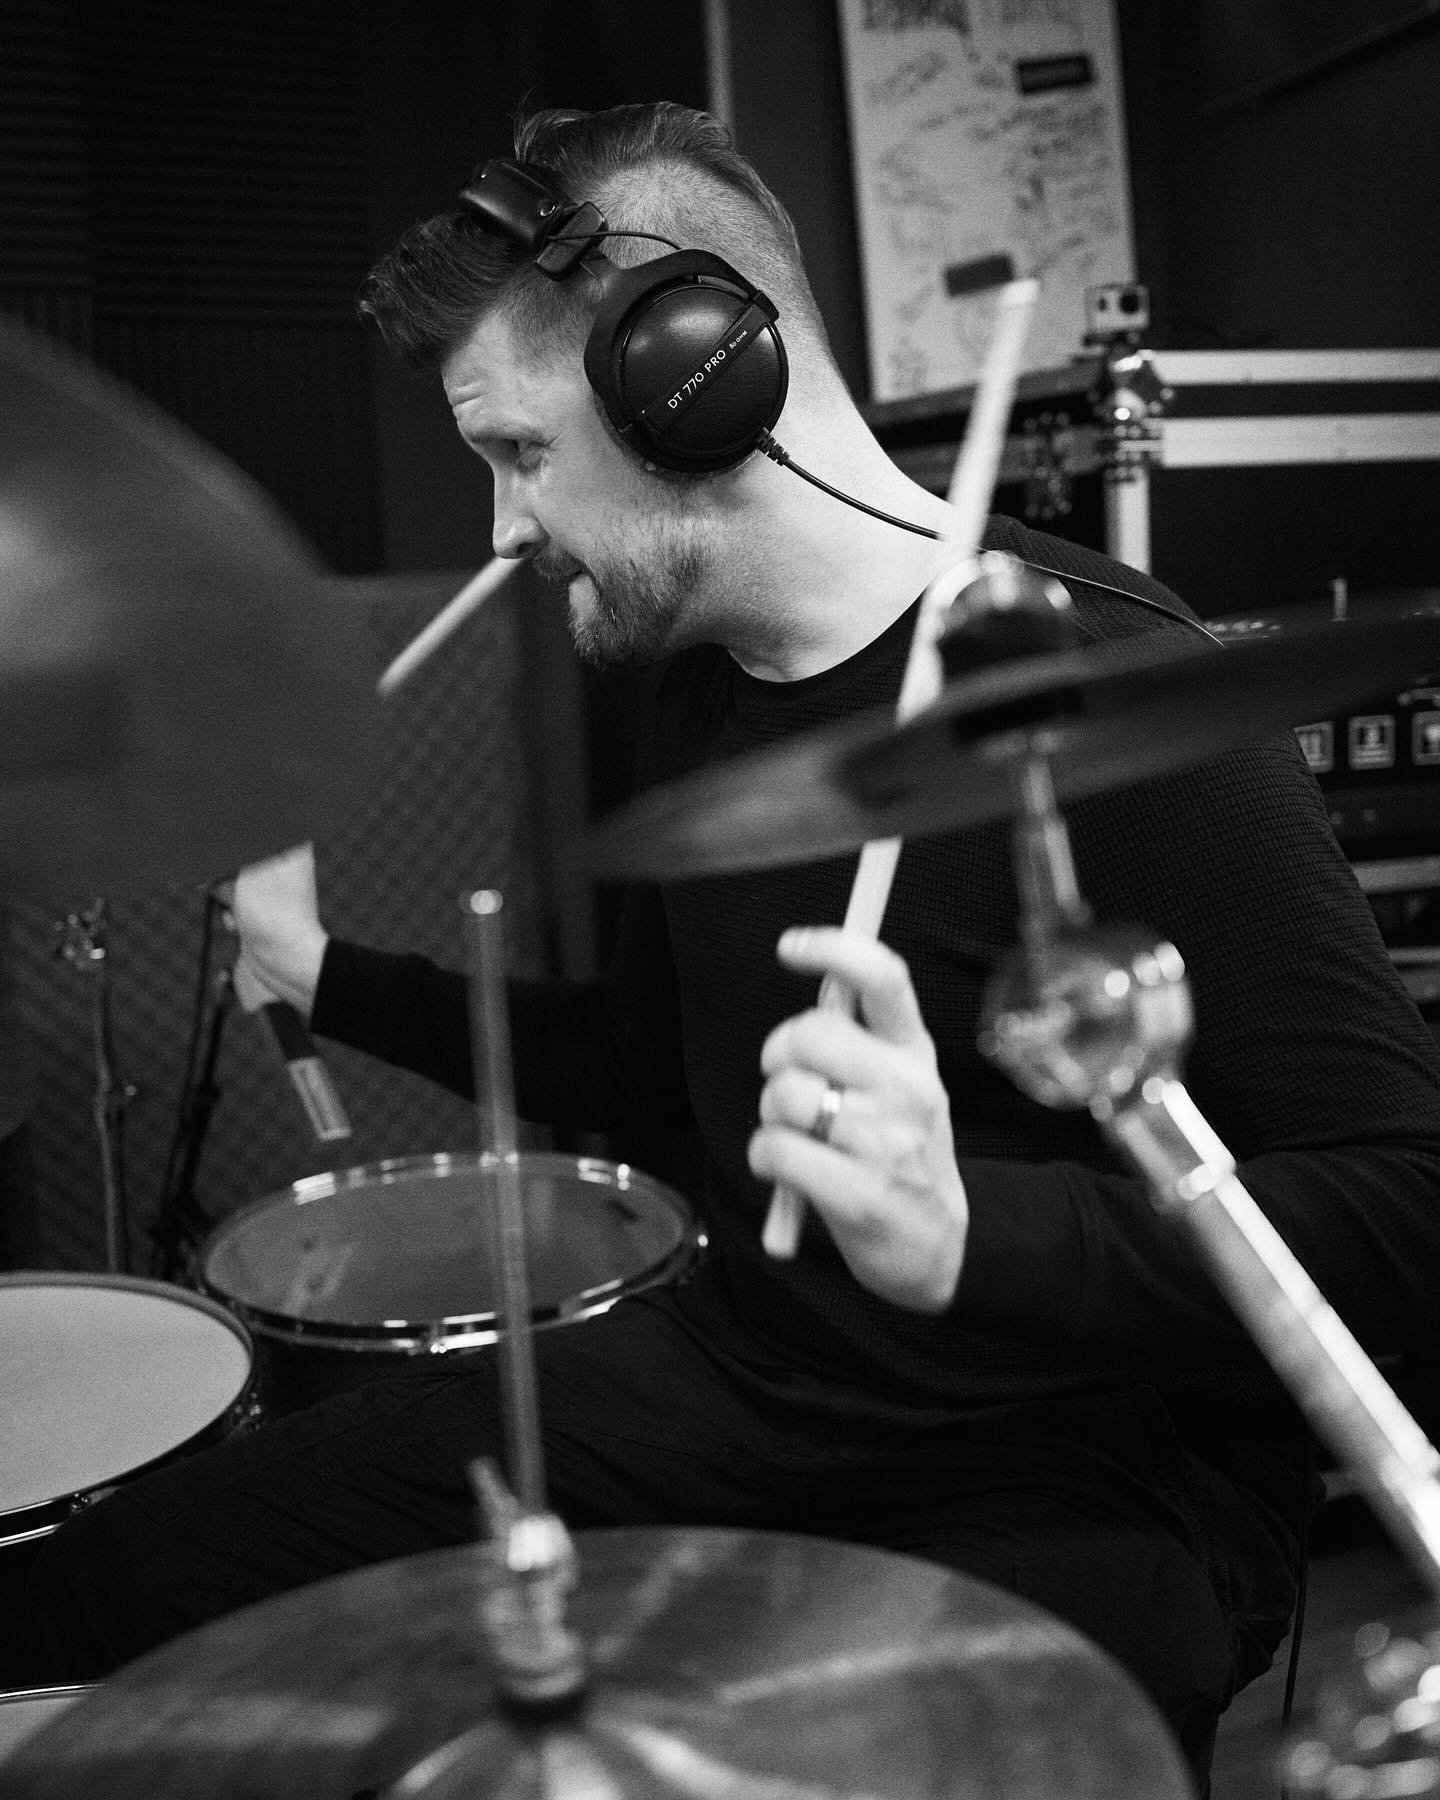 Here&rsquo;s Kimi. Guess what&rsquo;s his instrument?
#killingdarlings #metaldrummers #drummersofinstagram #recordingdrums #drumtracking #melodicmetal